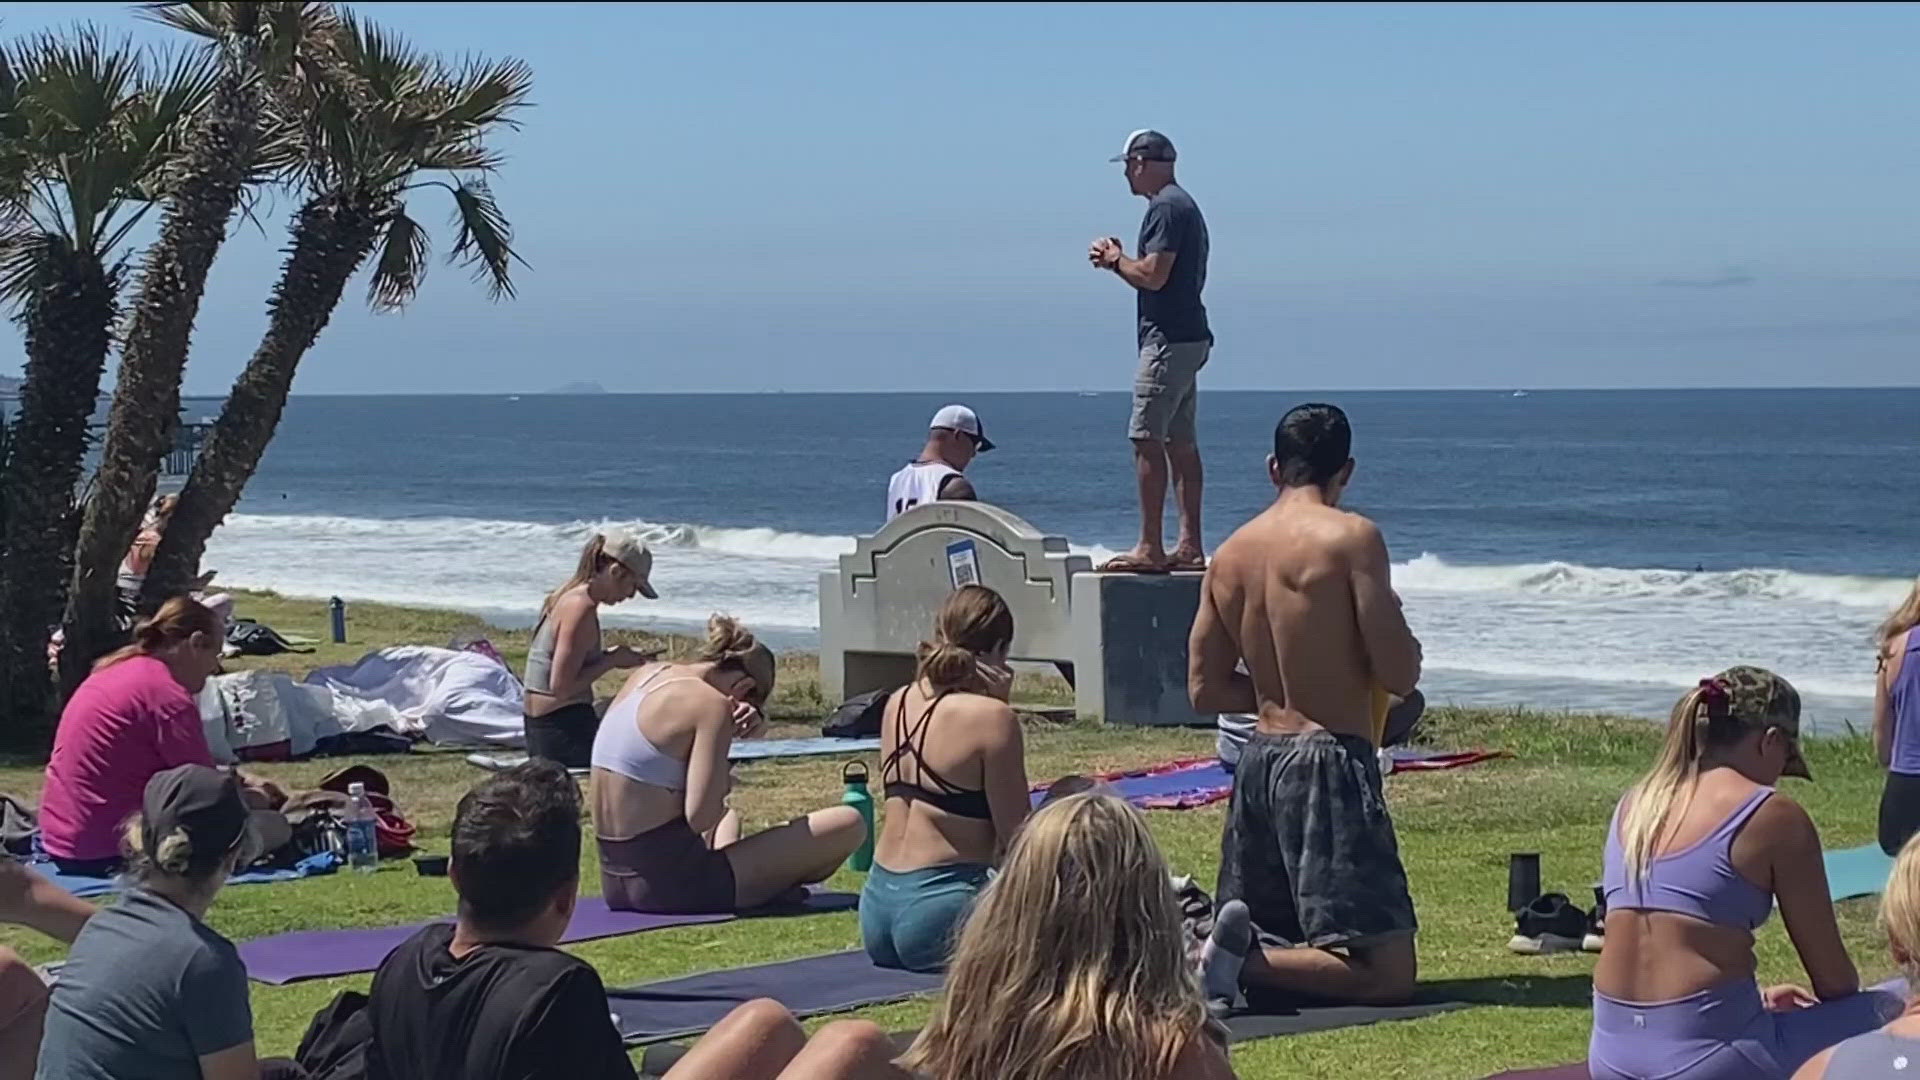 For the second time in a matter of weeks, a popular yoga instructor was ticketed for offering his donation-optional class in Pacific Beach.